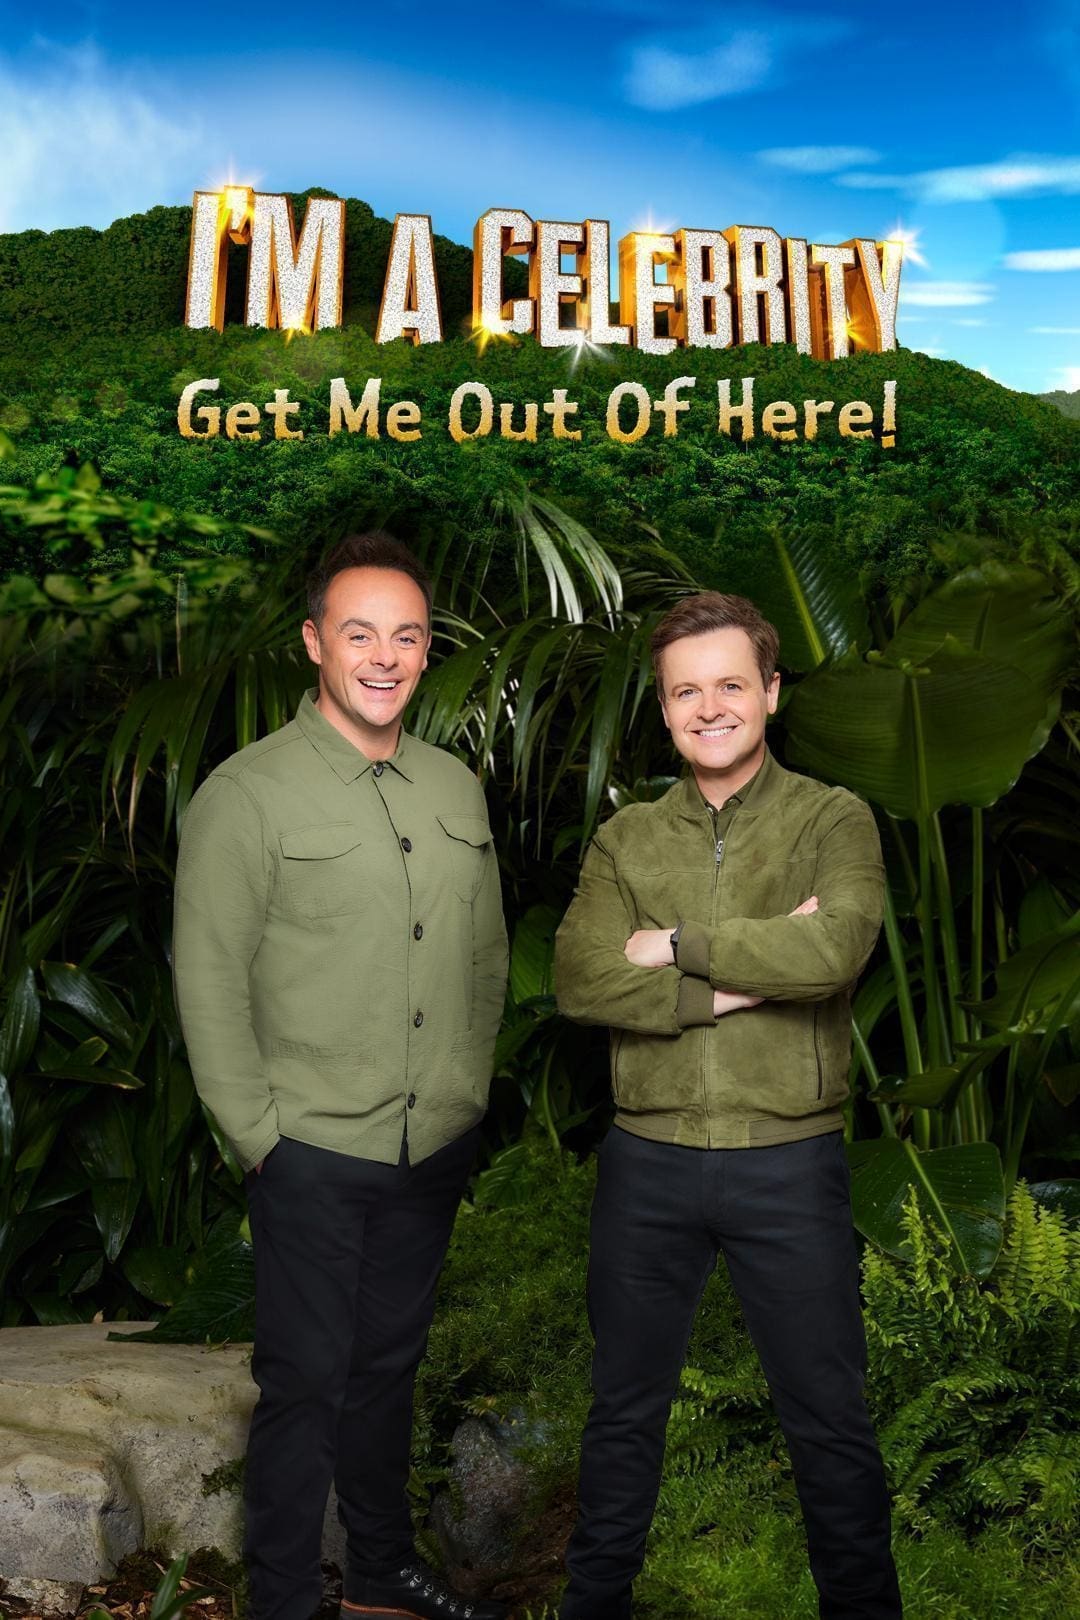 I'm a Celebrity Get Me Out of Here! (2002)